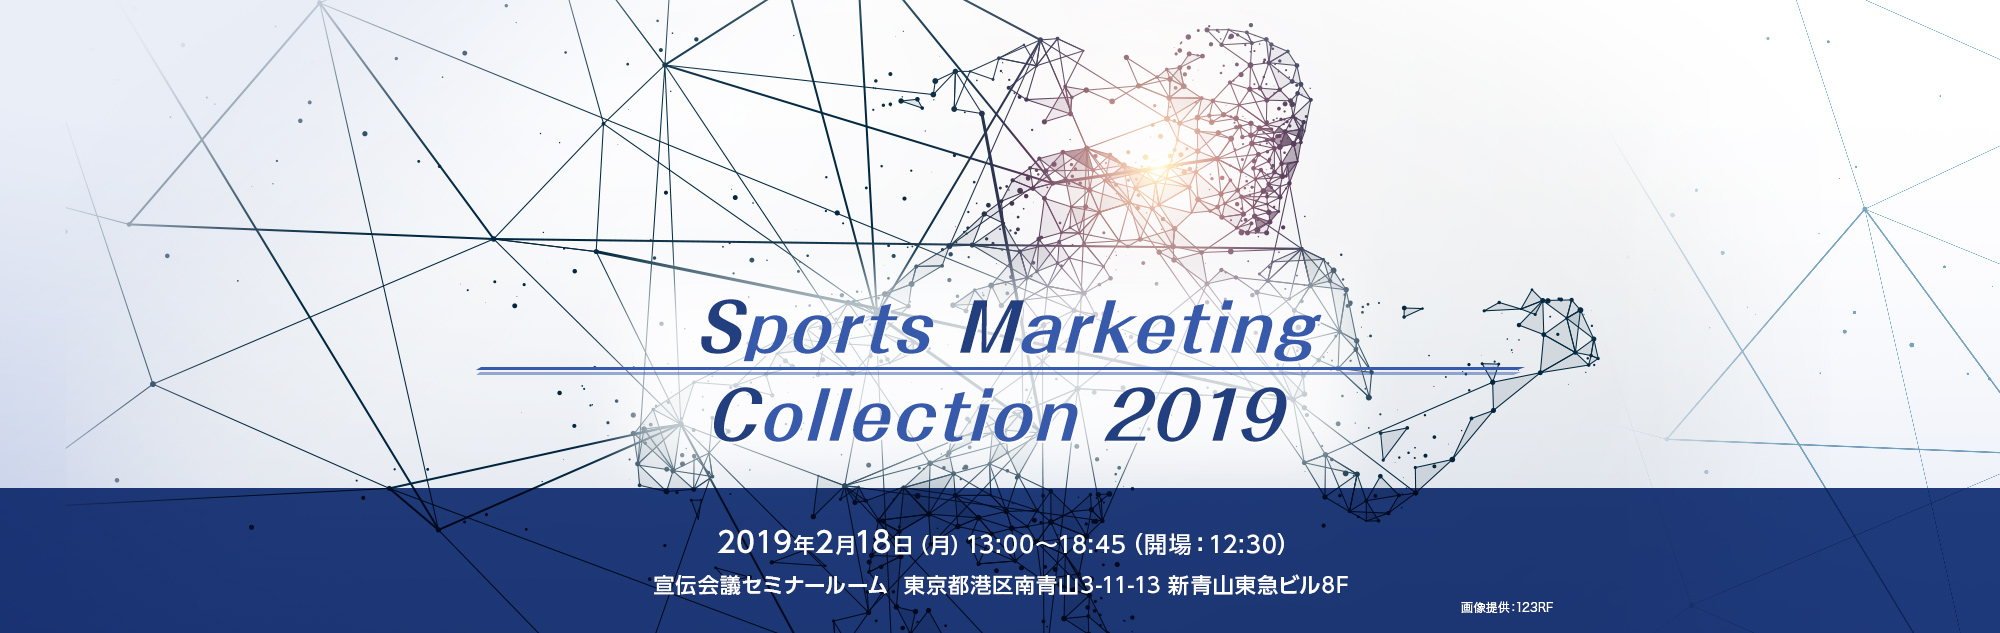 Sports Marketing Collection 2019